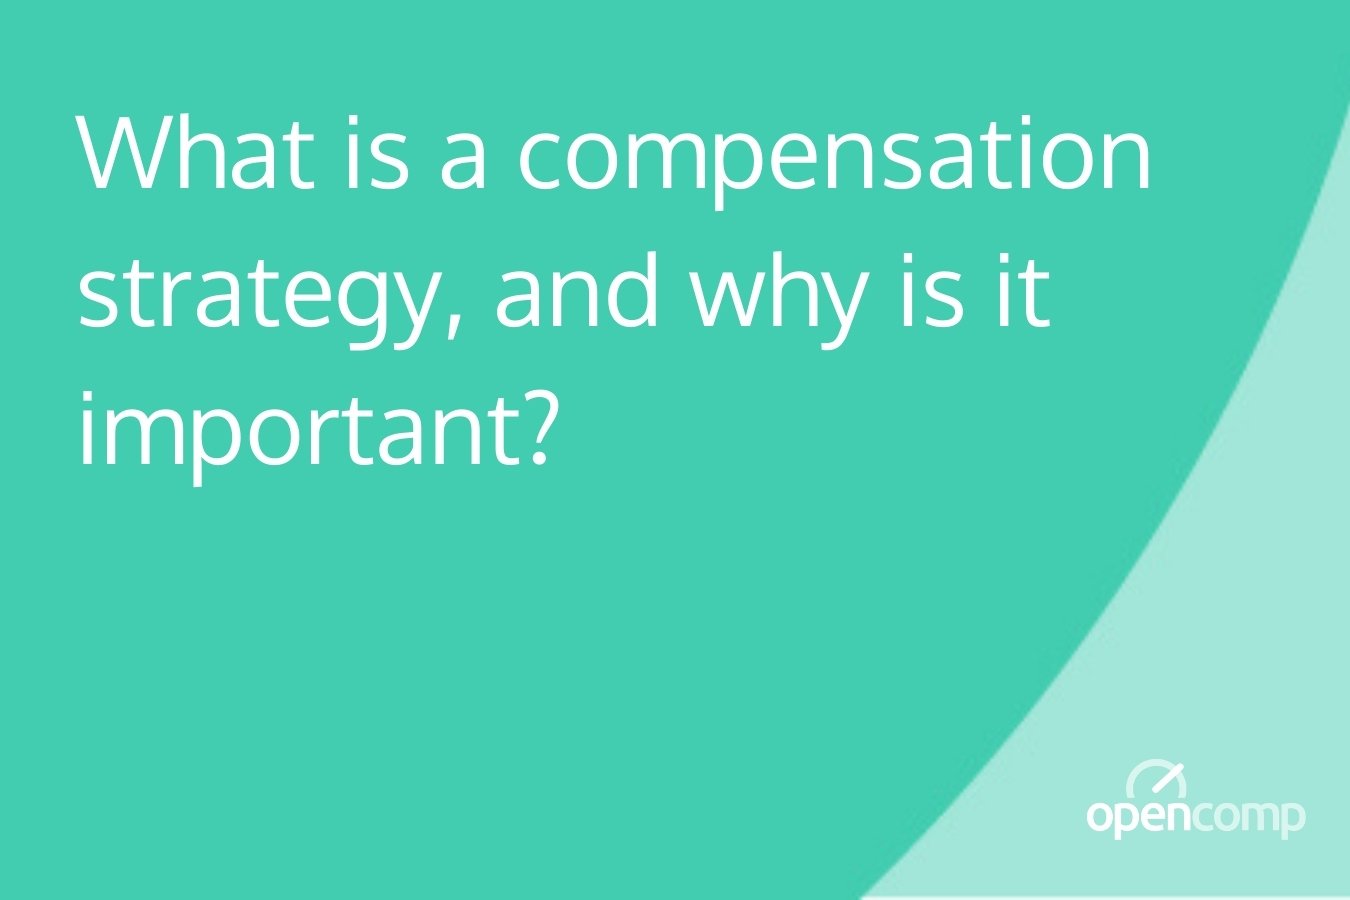 What is a compensation strategy, and why is it important